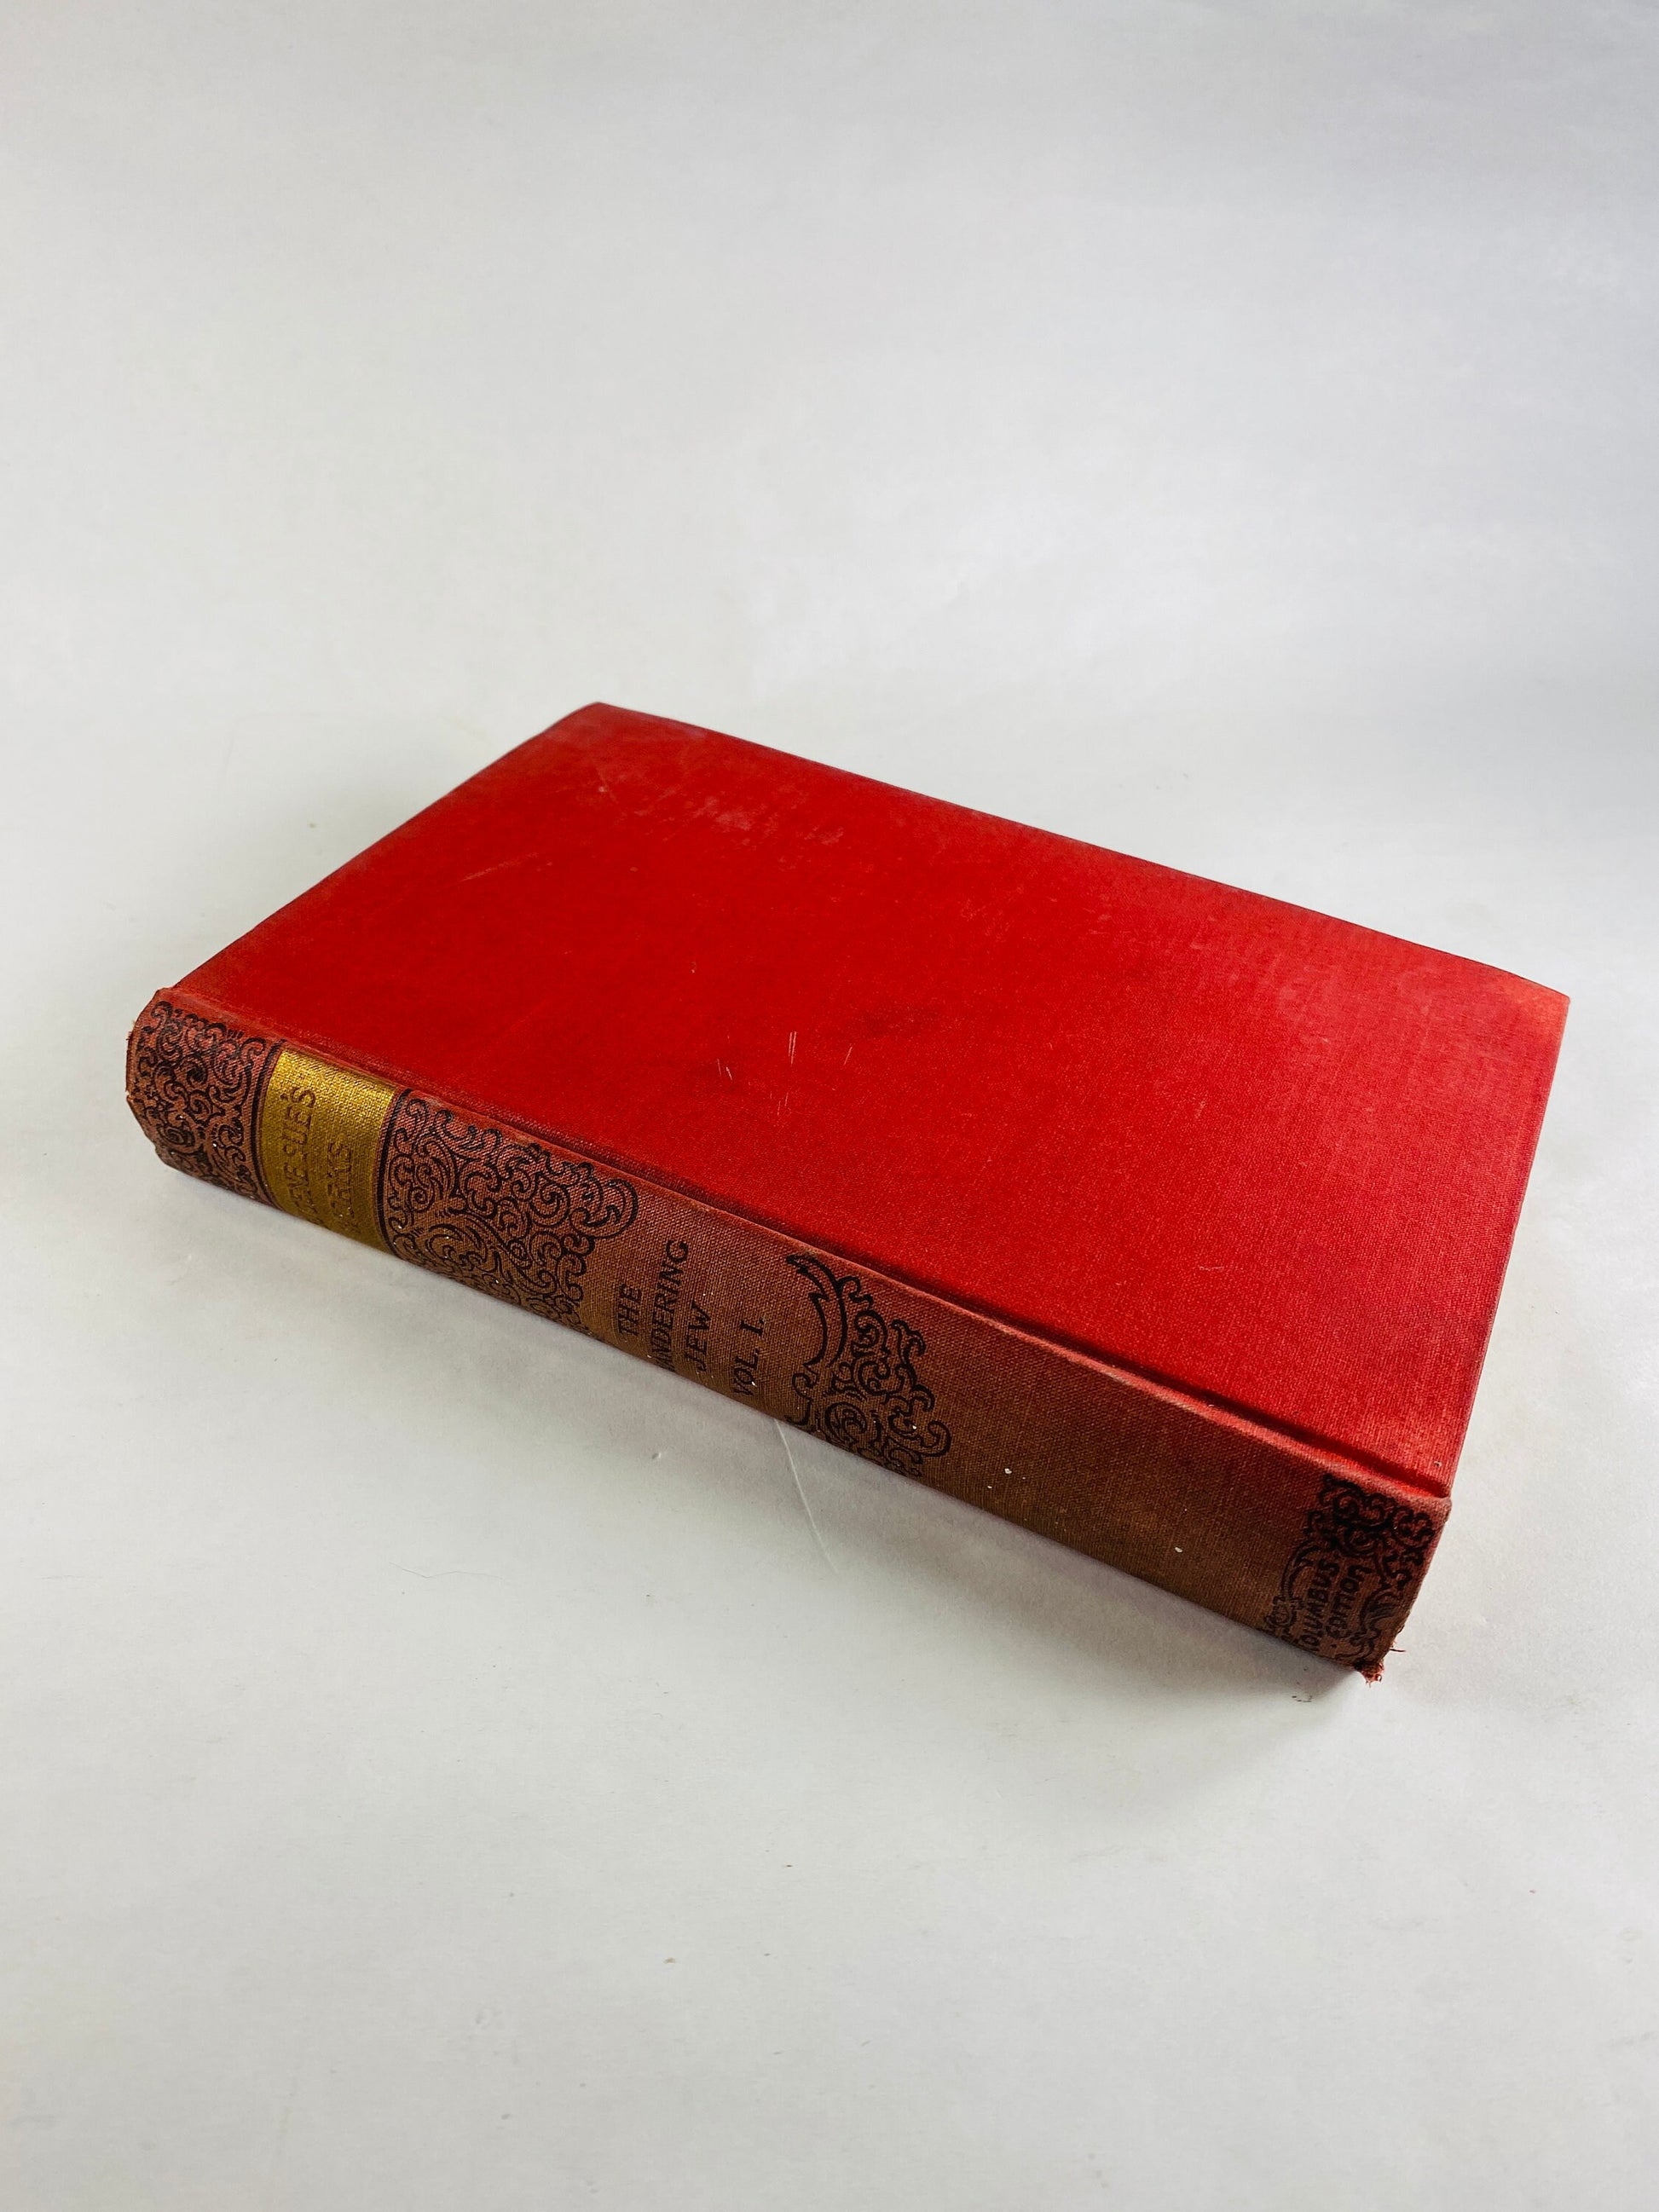 Wandering Jew volume 1 by Eugene Sue circa 1900. GORGEOUS red and gold antique decor